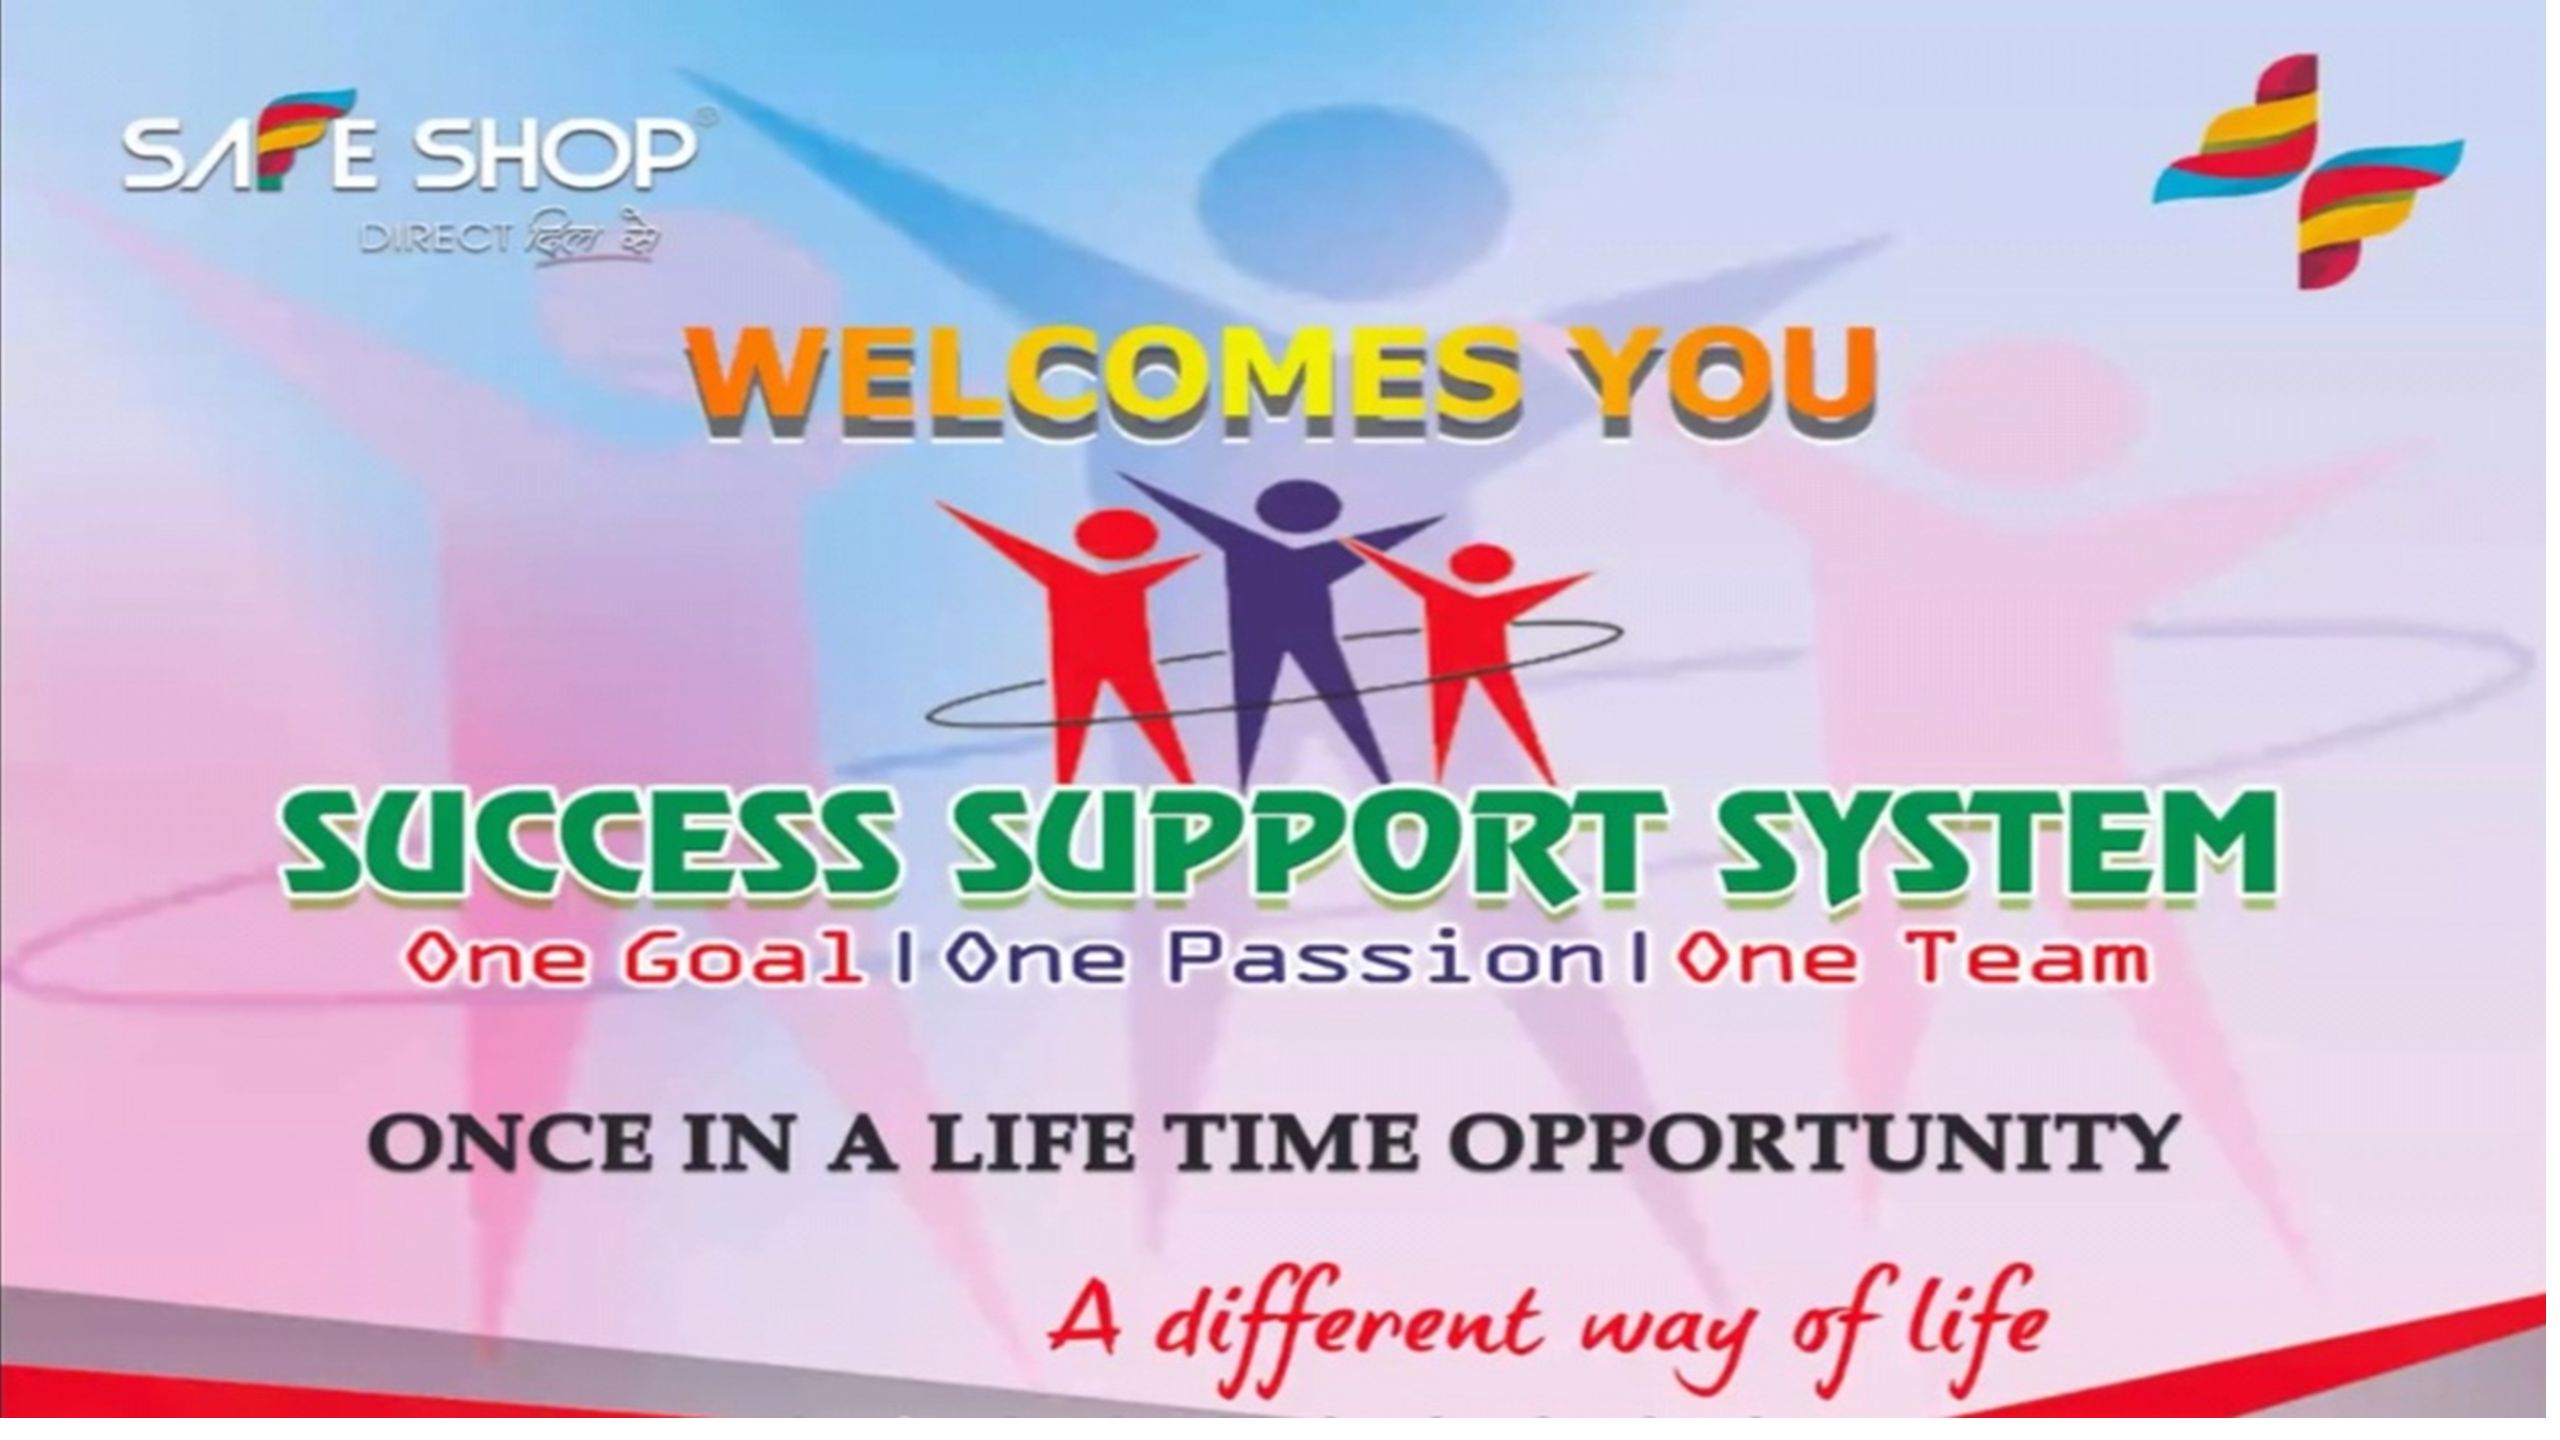 Share 85+ success support system logo latest